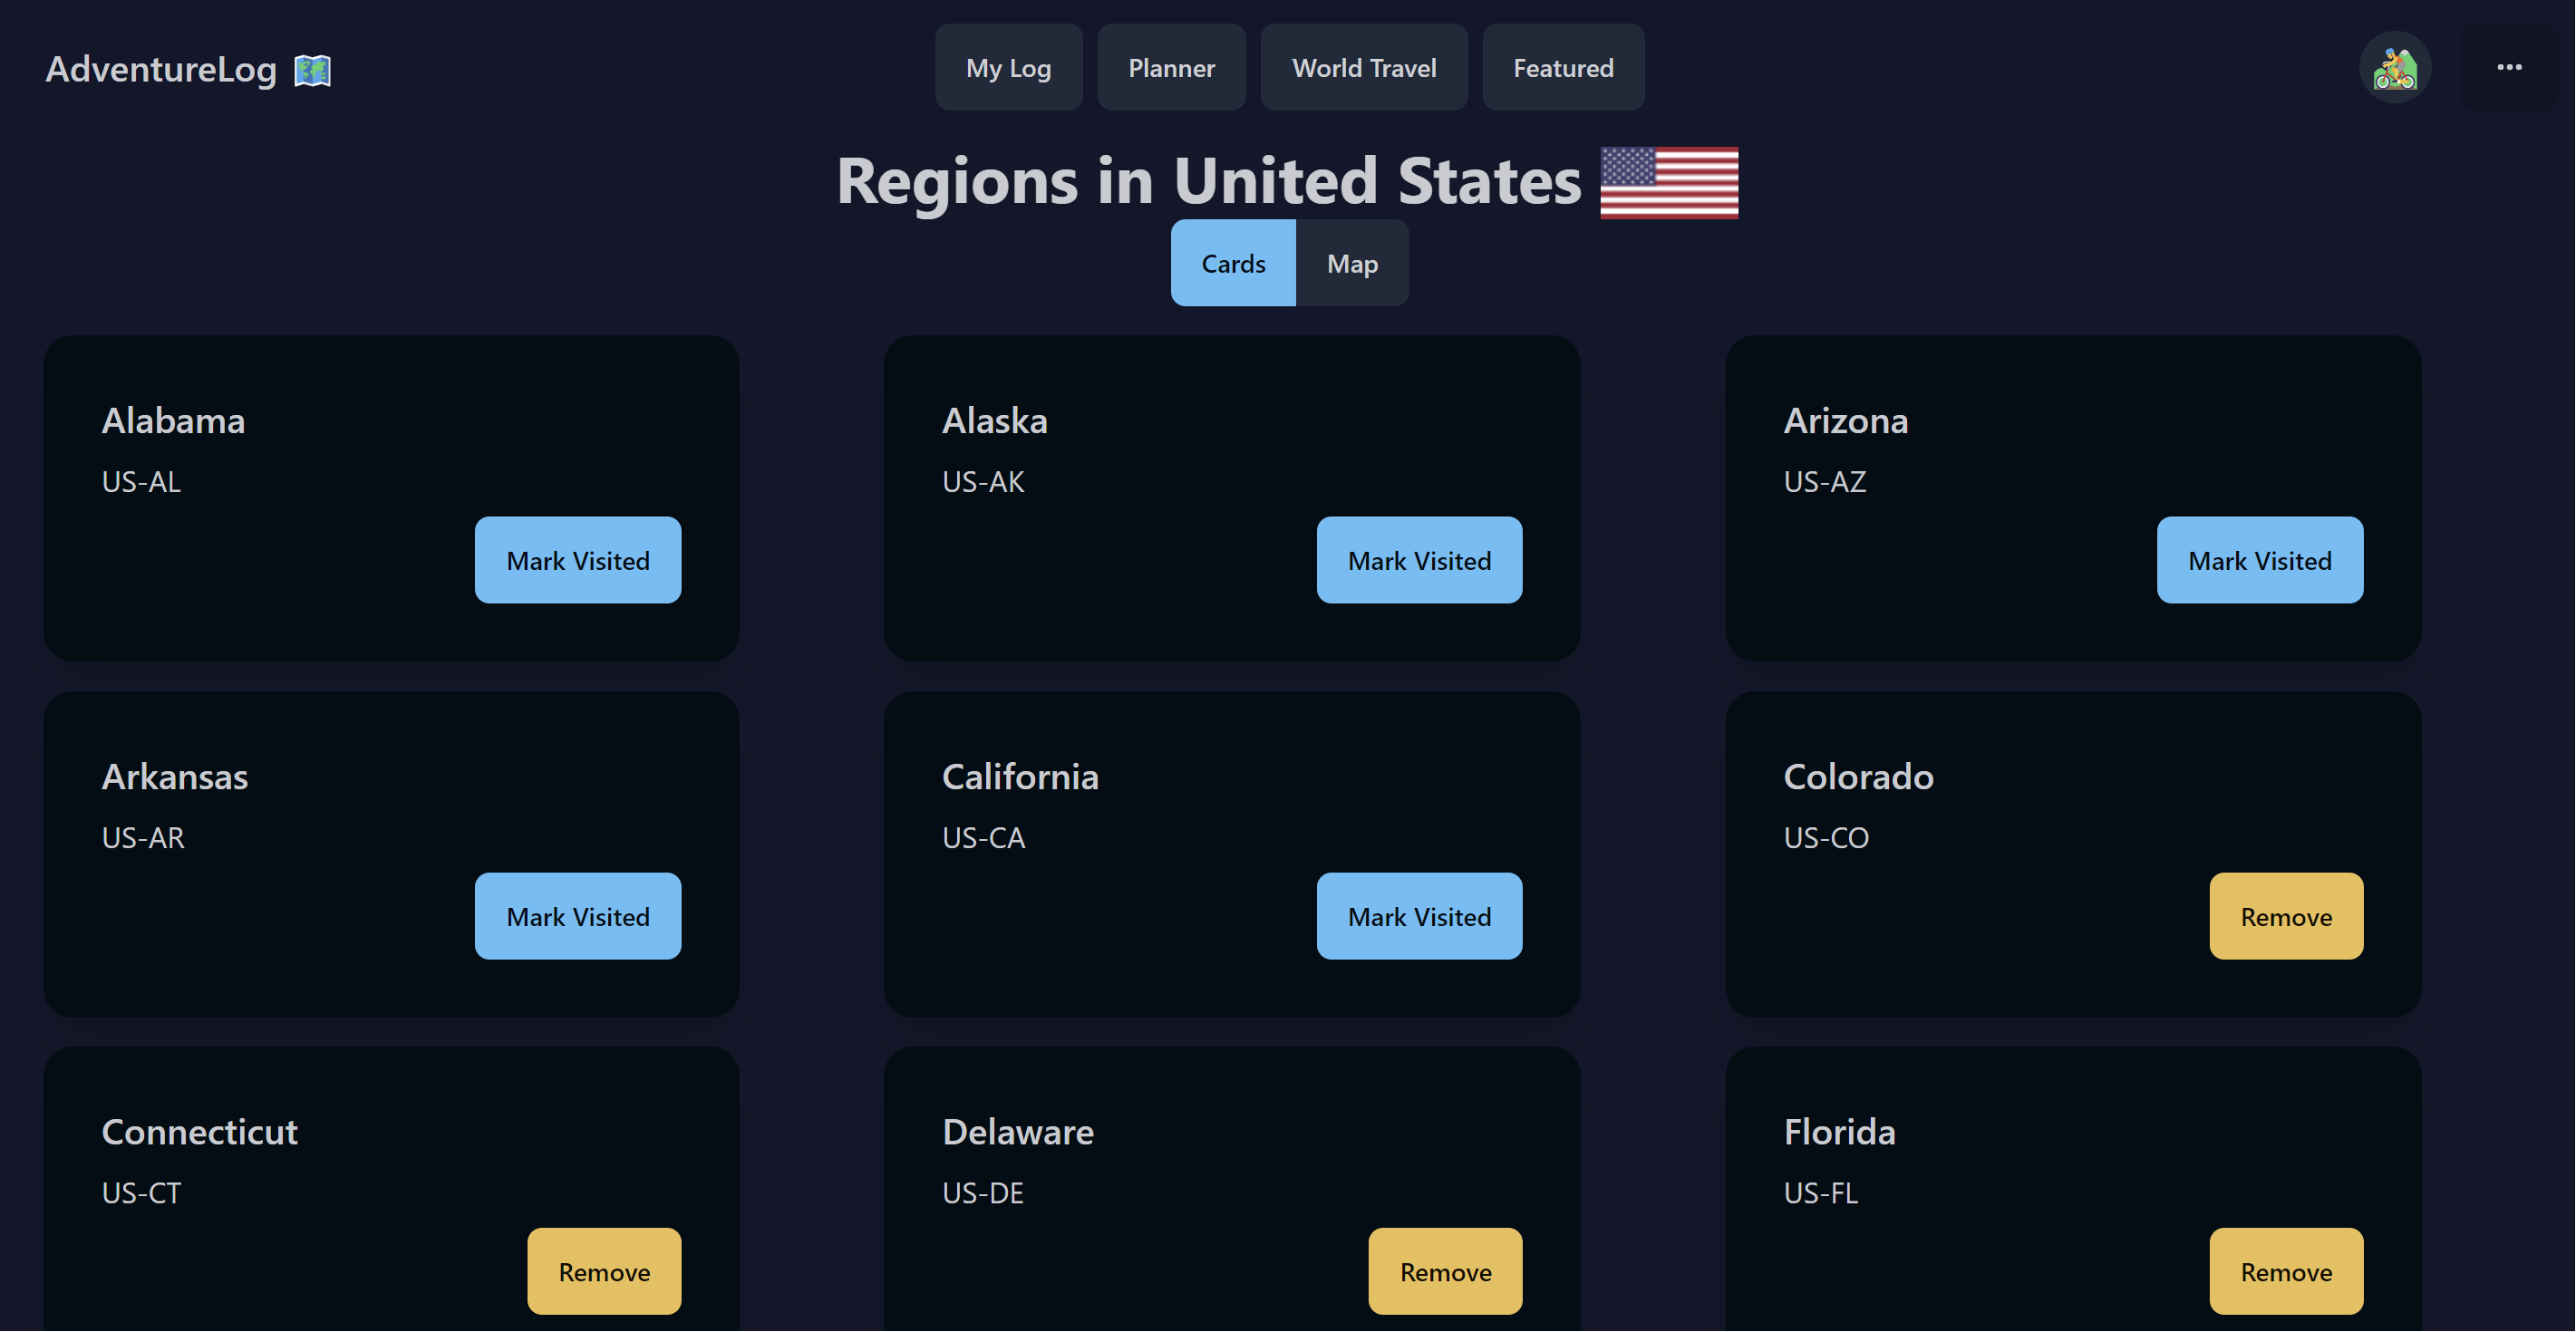 Region List for the United States